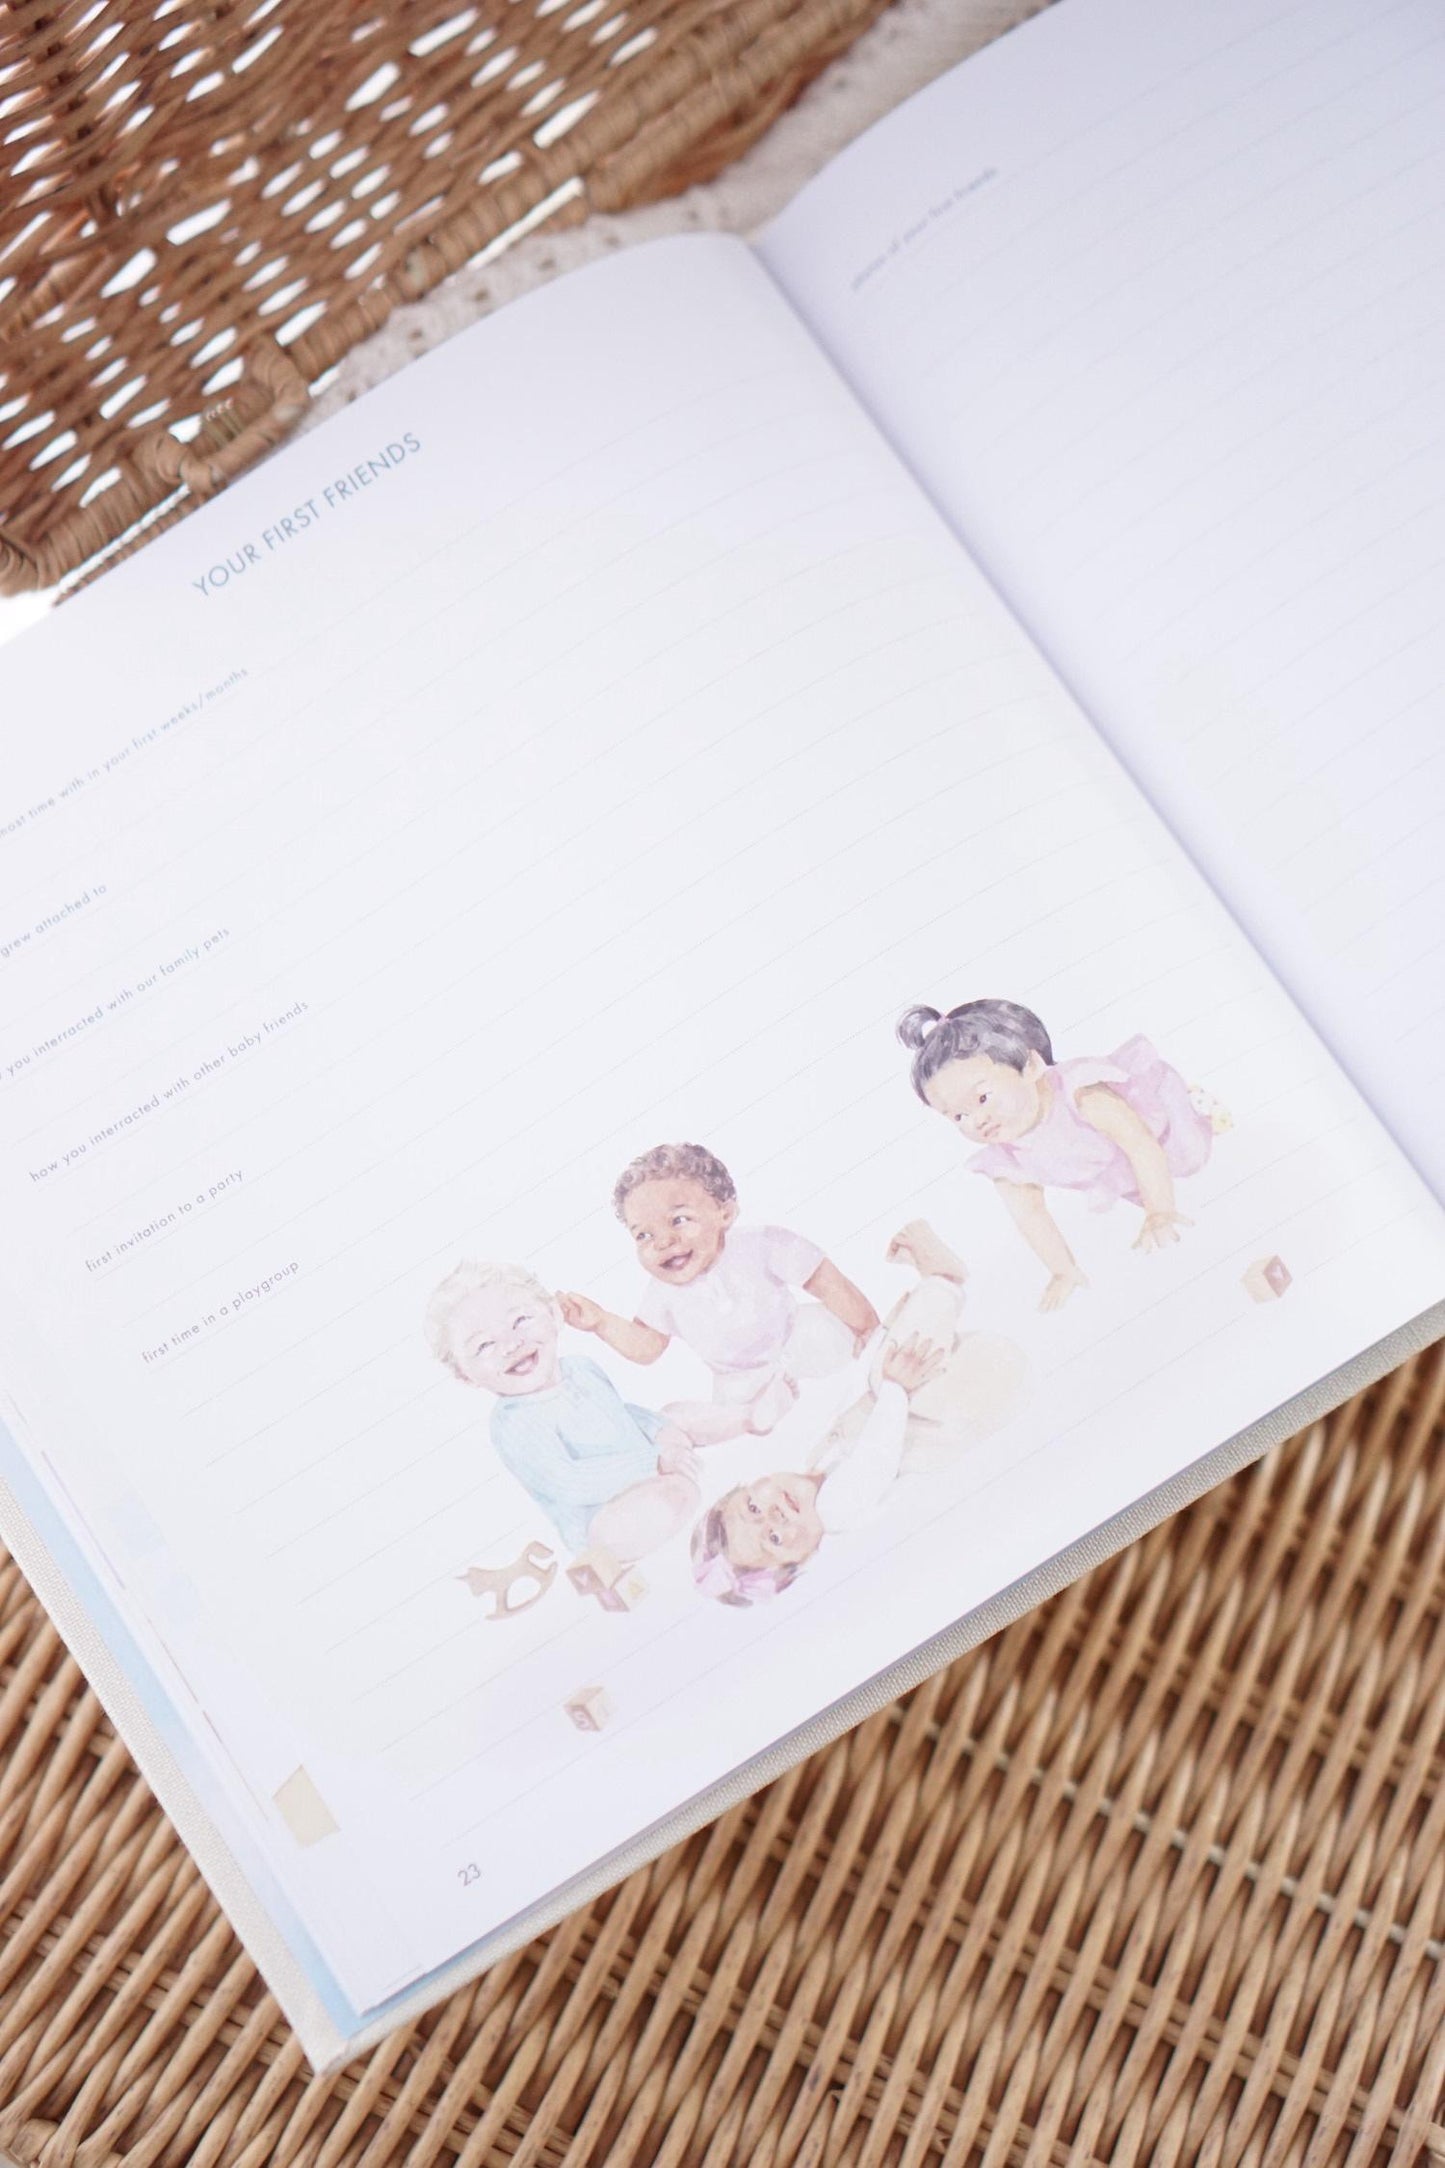 Baby Record Book | Your First Years